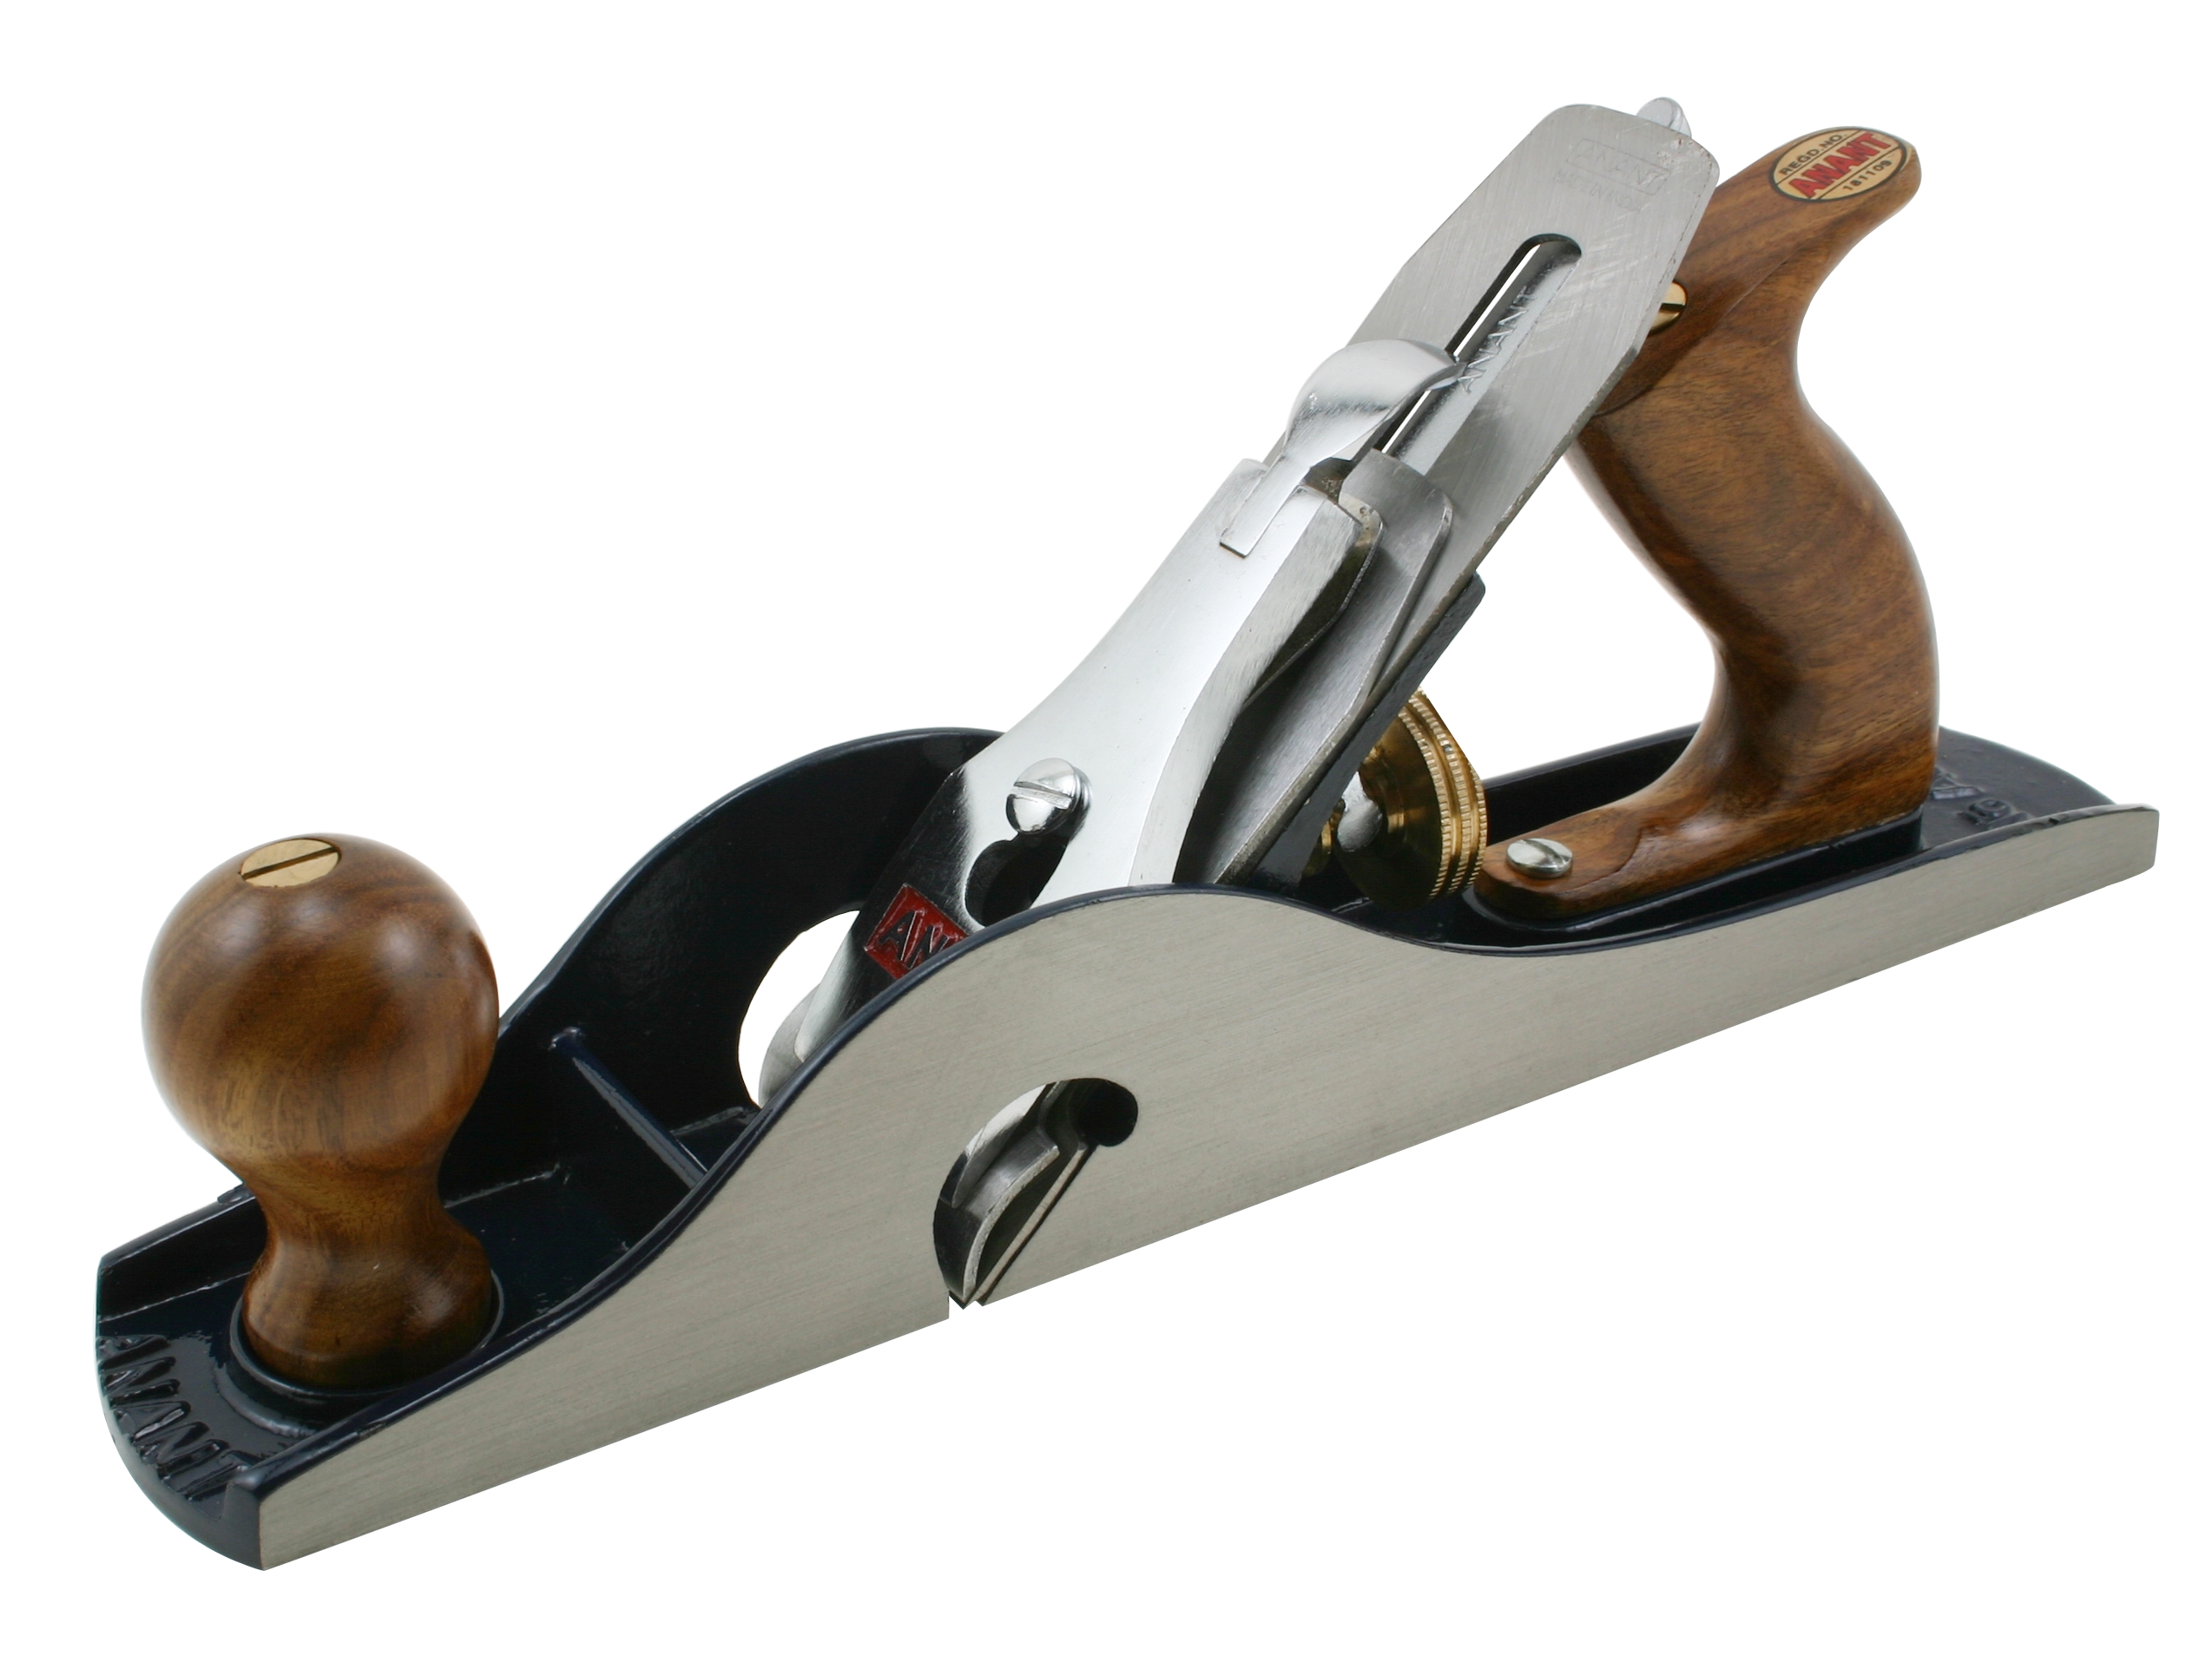 What Is A Rebate Plane Used For